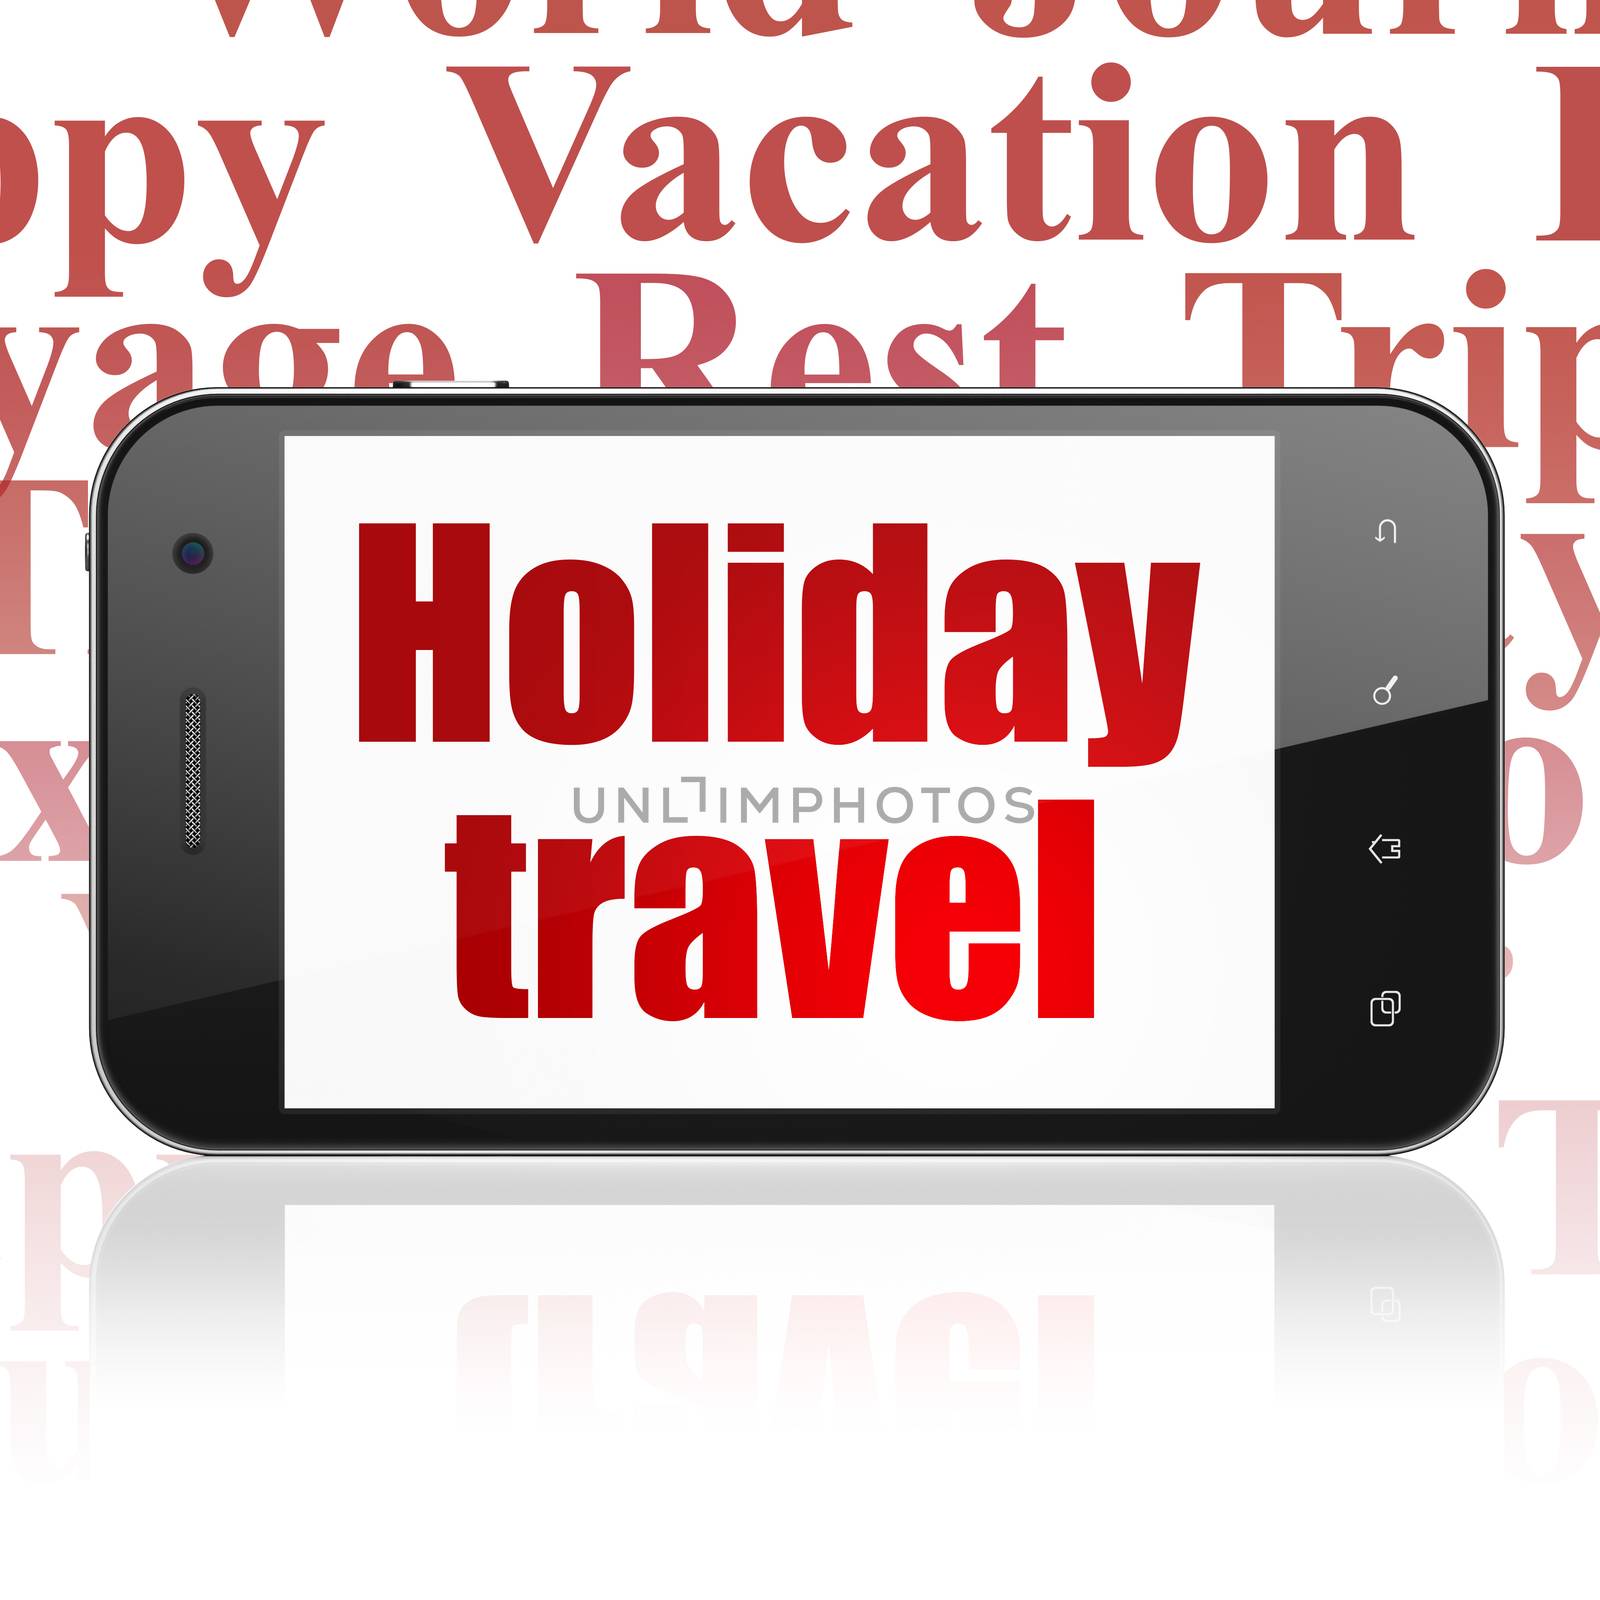 Travel concept: Smartphone with  red text Holiday Travel on display,  Tag Cloud background, 3D rendering